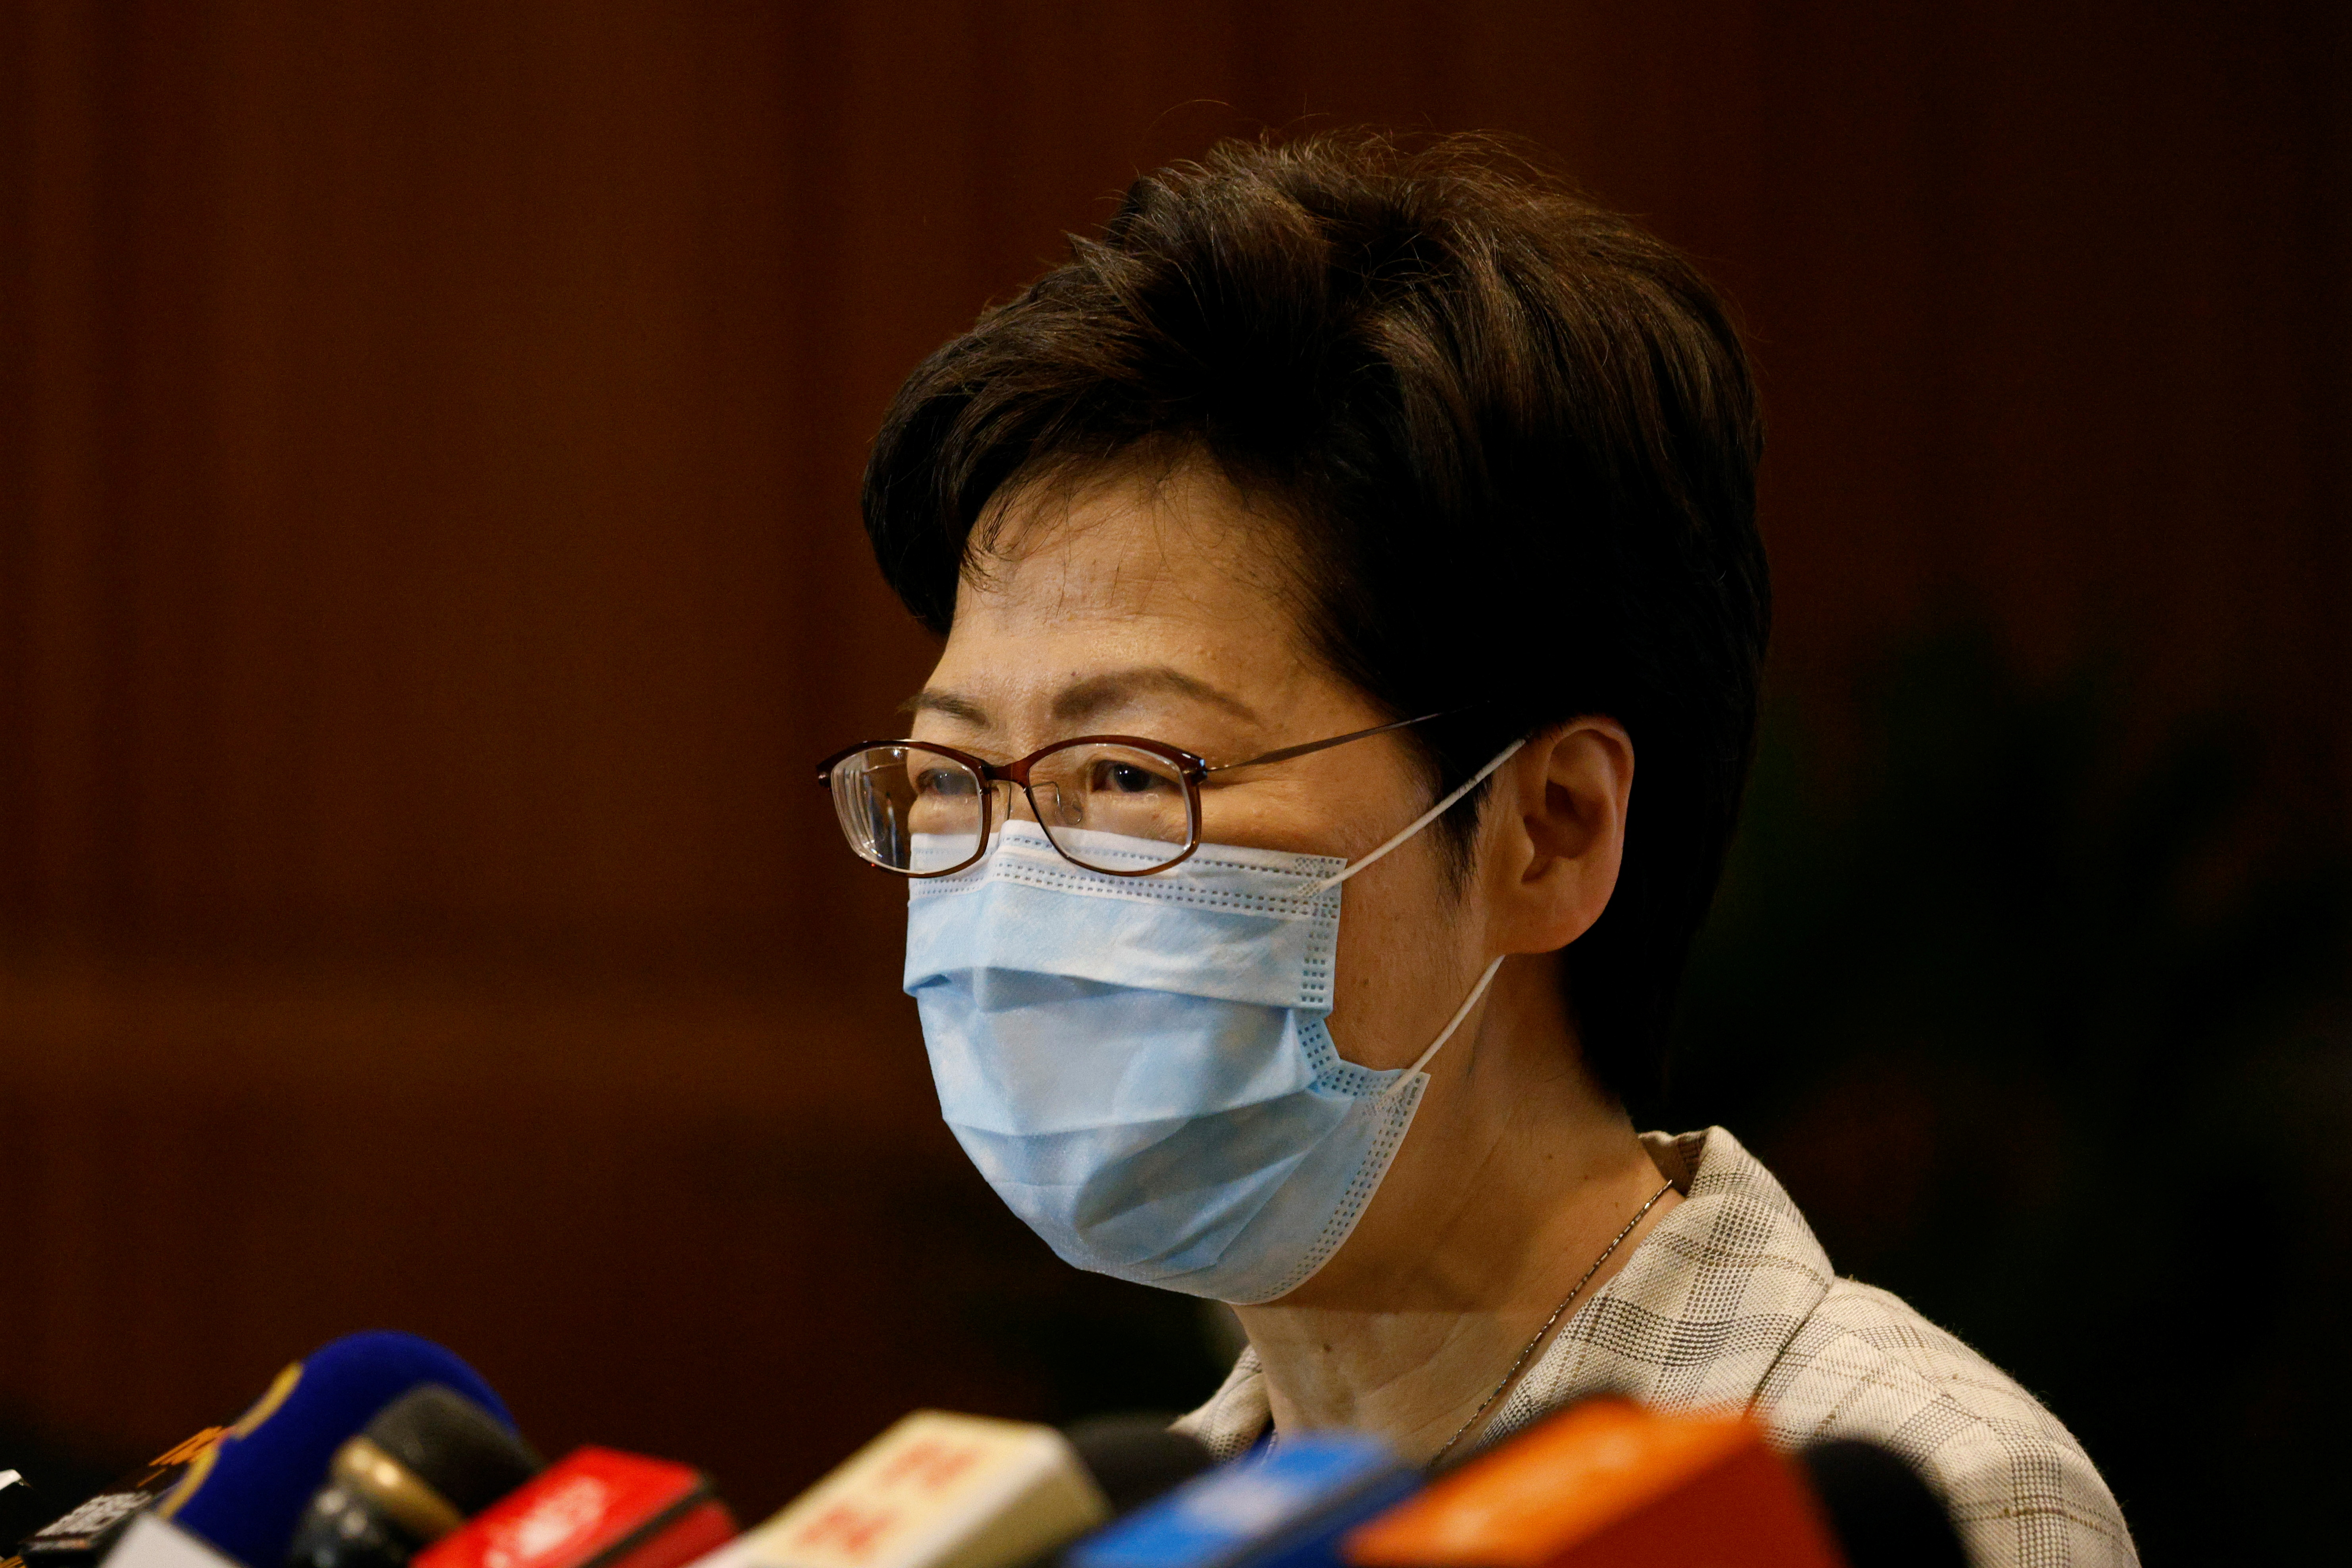 Hong Kong Chief Executive Carrie Lam speaks to media at polling station during voting of the election committee, in Hong Kong, China, September 19, 2021. REUTERS/Tyrone Siu